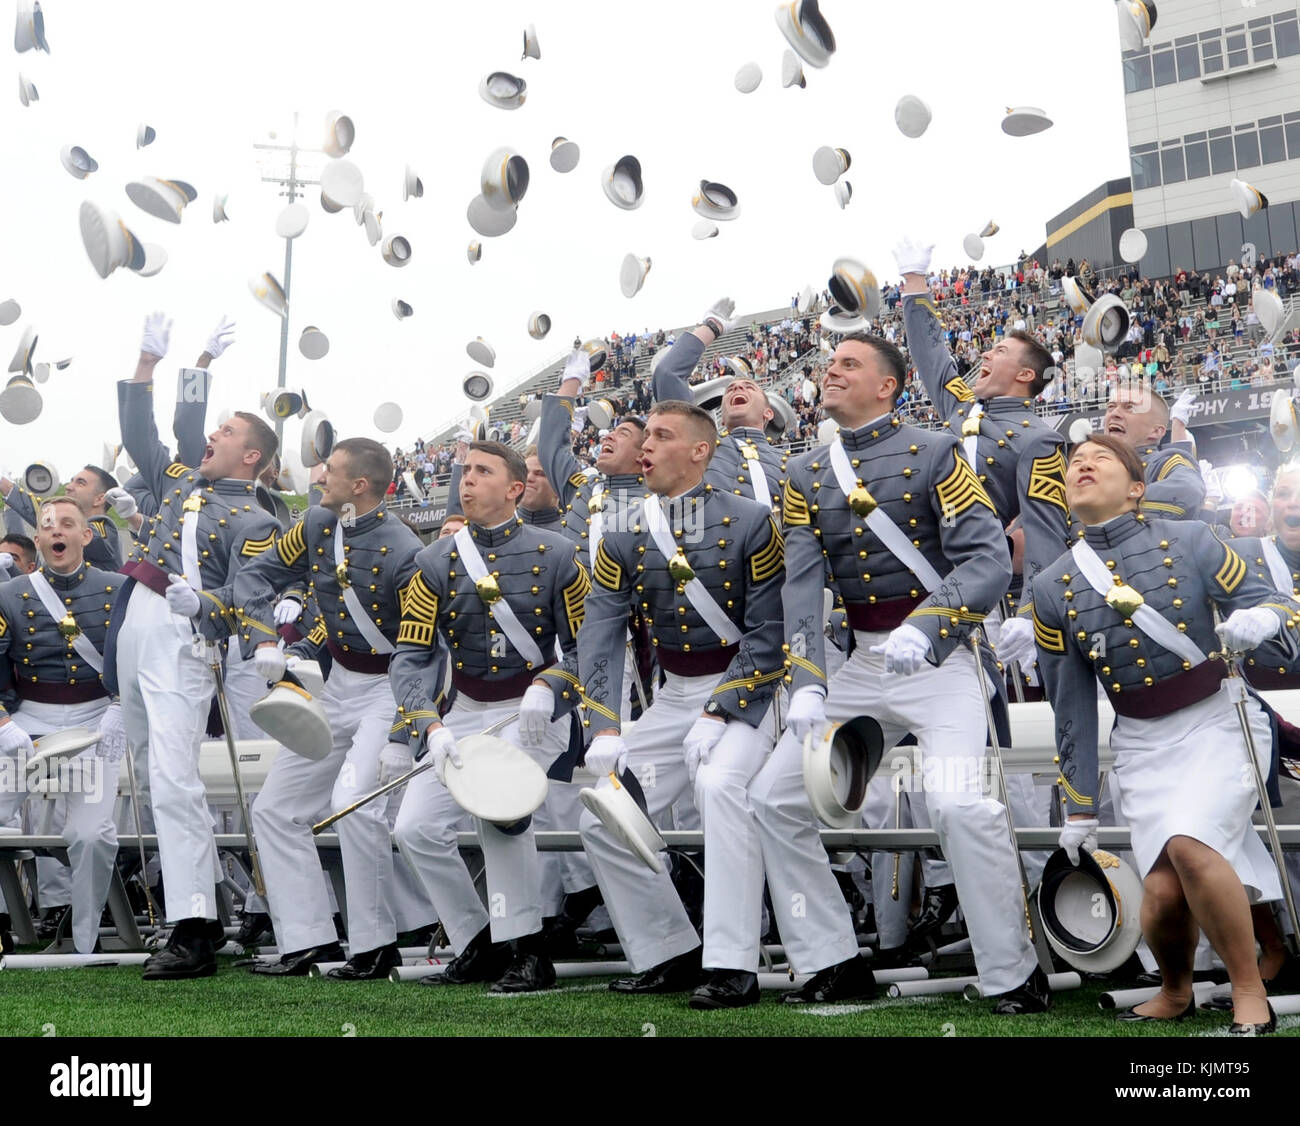 WEST POINT, NY - MAY 21: Vice President Joe Biden Delivers Commencement Address At the West Point graduation ceremony. Cadets throw their hats in the air at the conclusion of the graduation ceremony at the U.S. Military Academy at West Point on May 21, 2016 in West Point, New York.   People:  Cadets Stock Photo